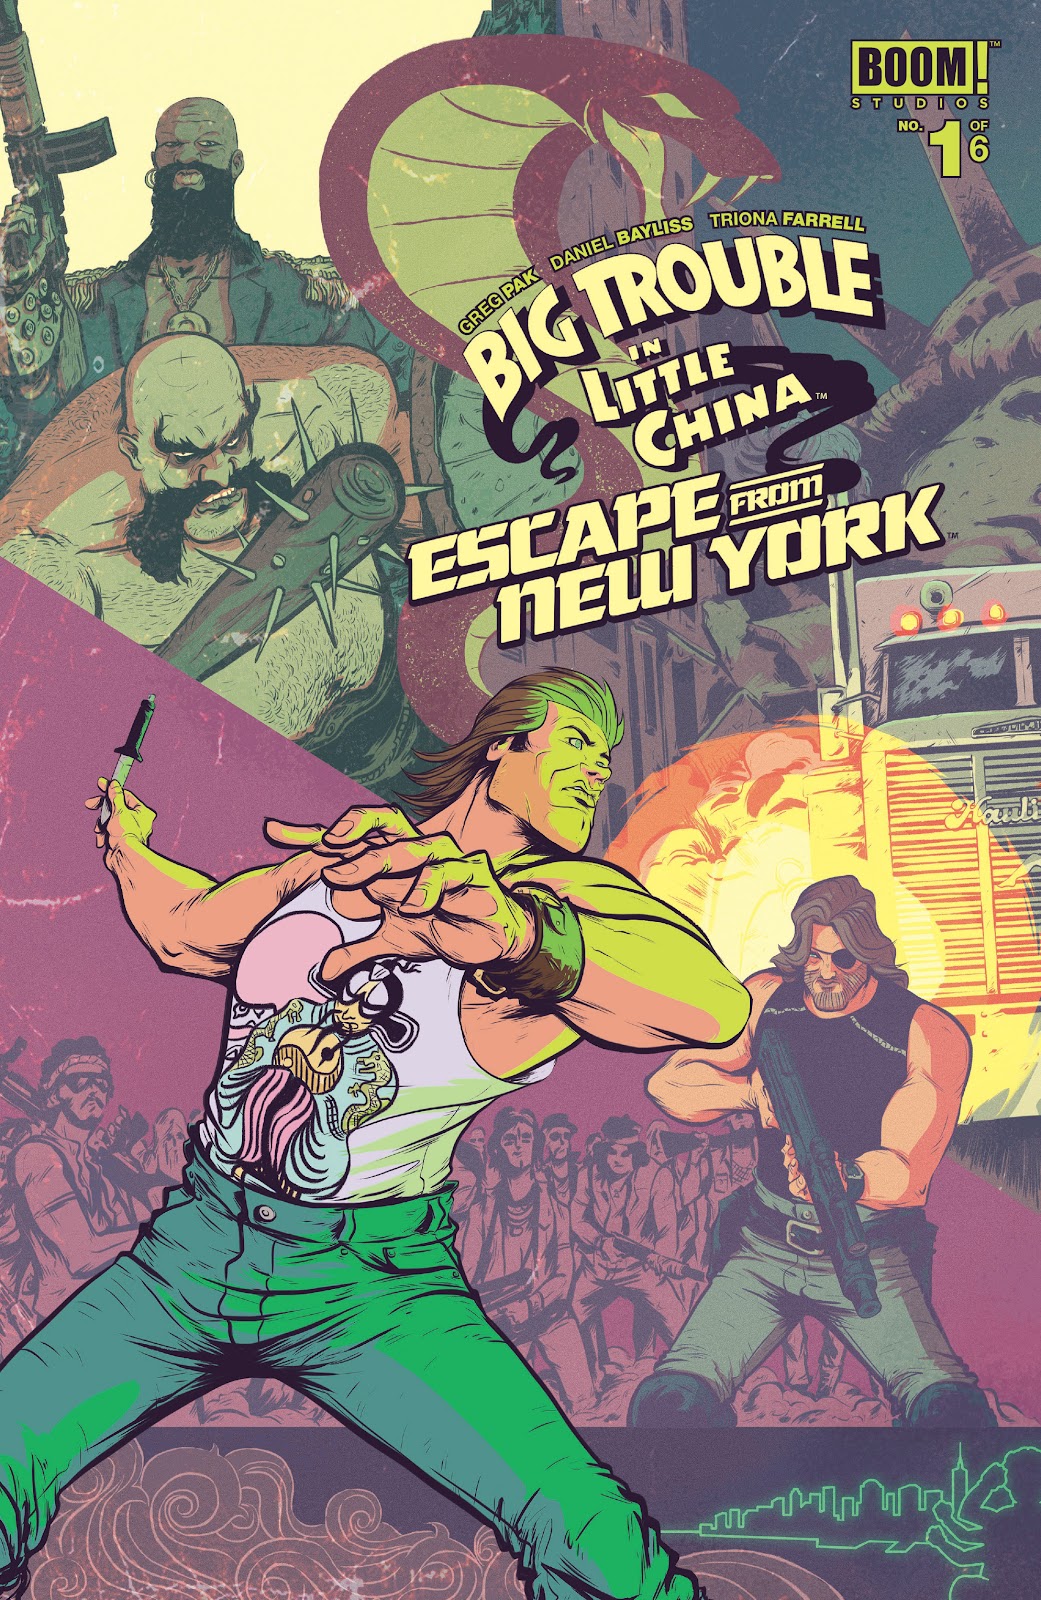 Big Trouble in Little China / Escape from New York issue 1 - Page 1